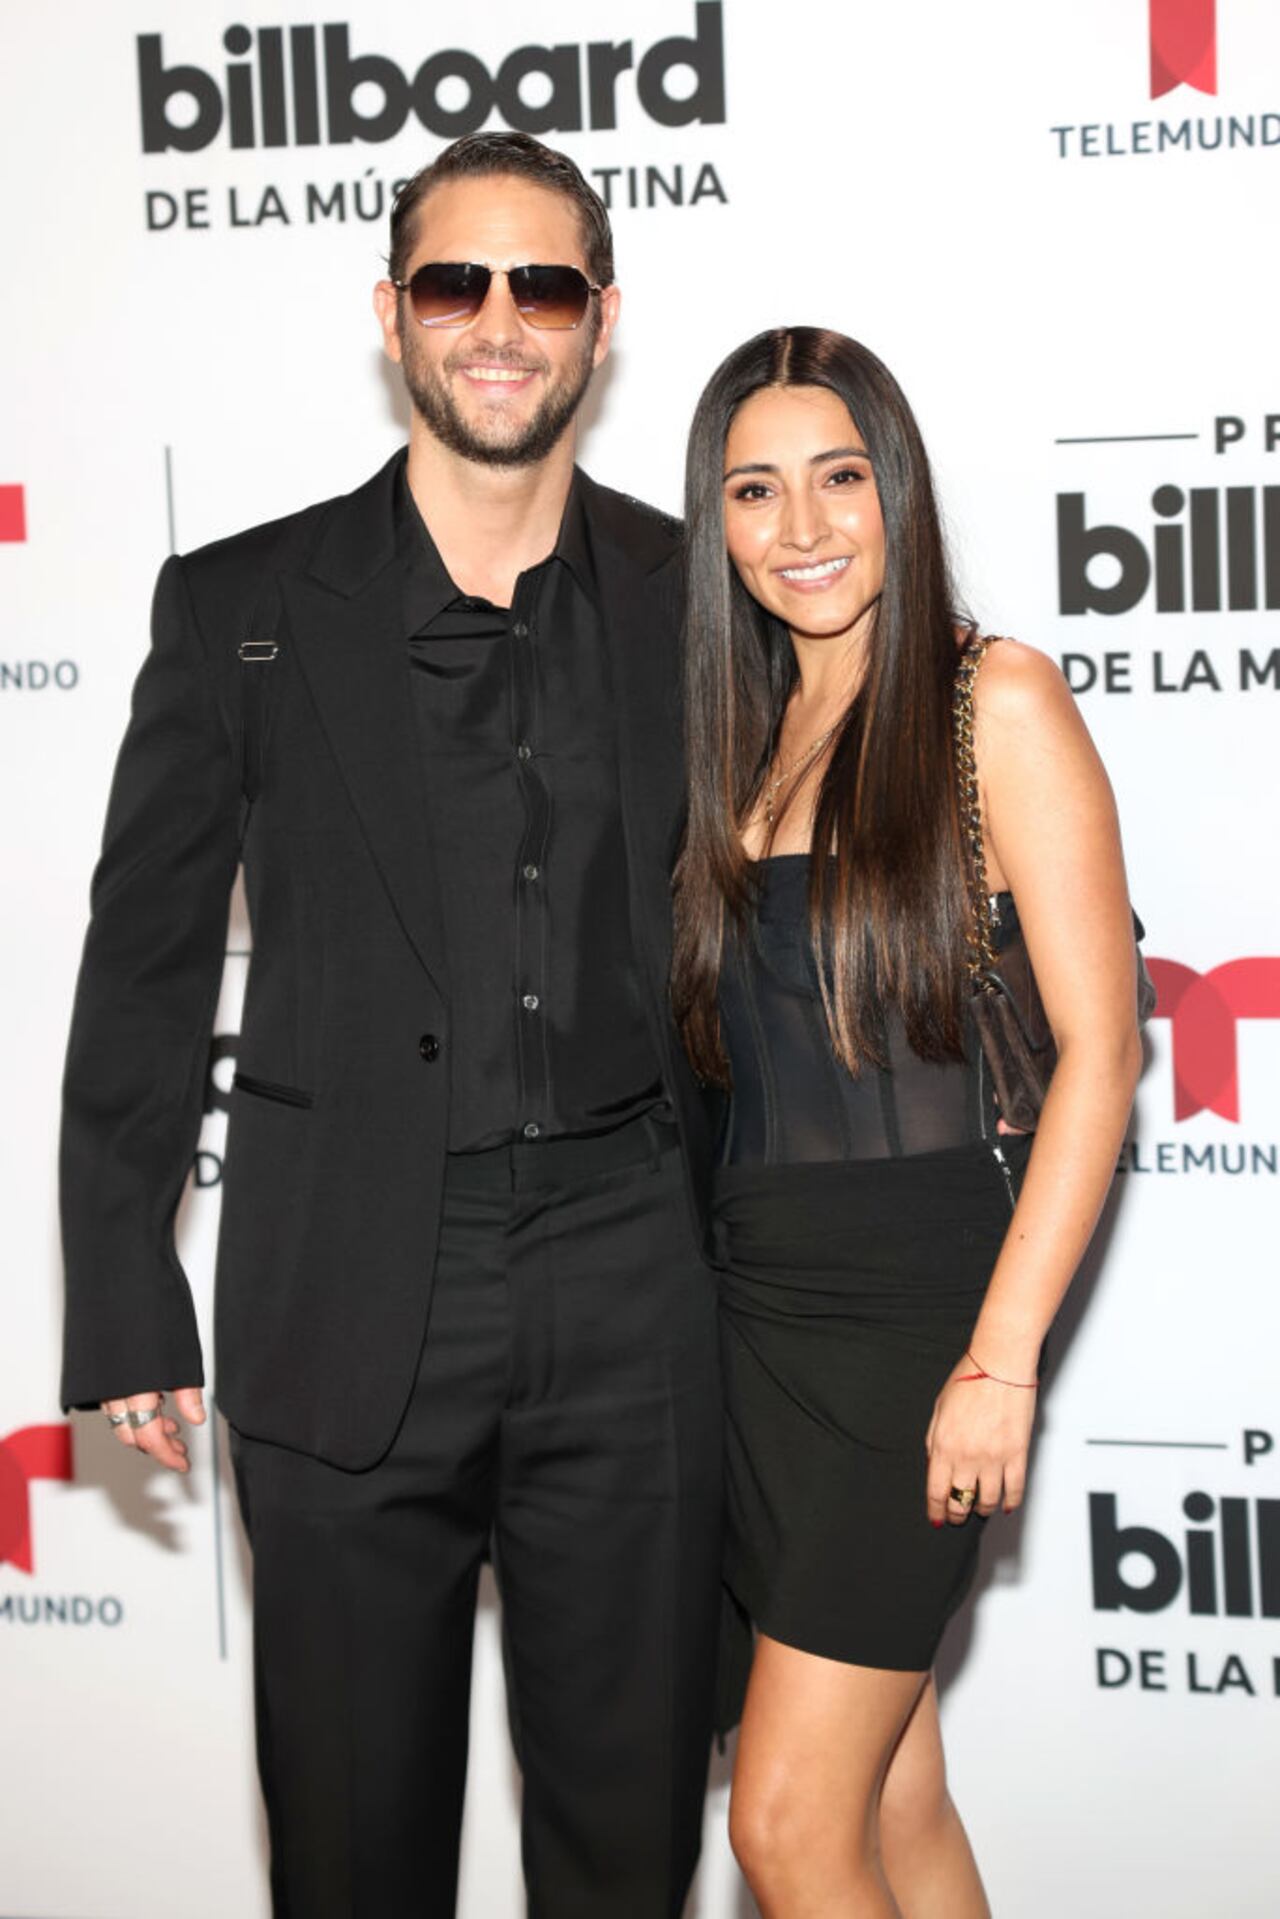 CORAL GABLES, FLORIDA - OCTOBER 05: Christopher von Uckermann (R) attends the 2023 Billboard Latin Music Awards at Watsco Center on October 05, 2023 in Coral Gables, Florida. (Photo by Rodrigo Varela/Getty Images)